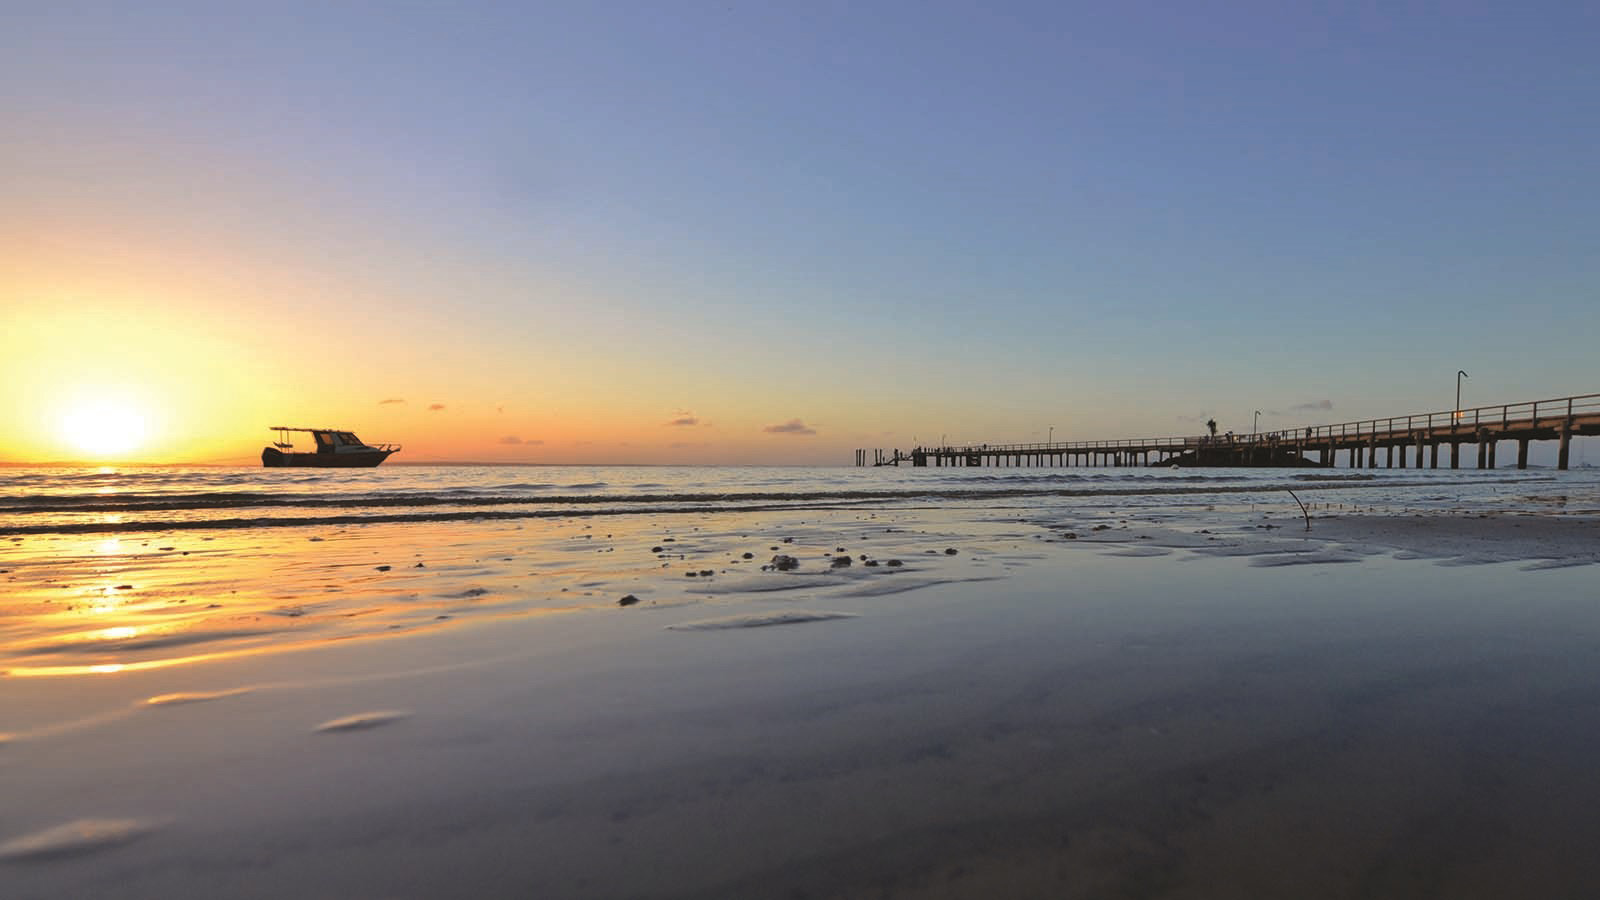 A Kingfisher Bay sunset | 10 reasons to visit Fraser Island